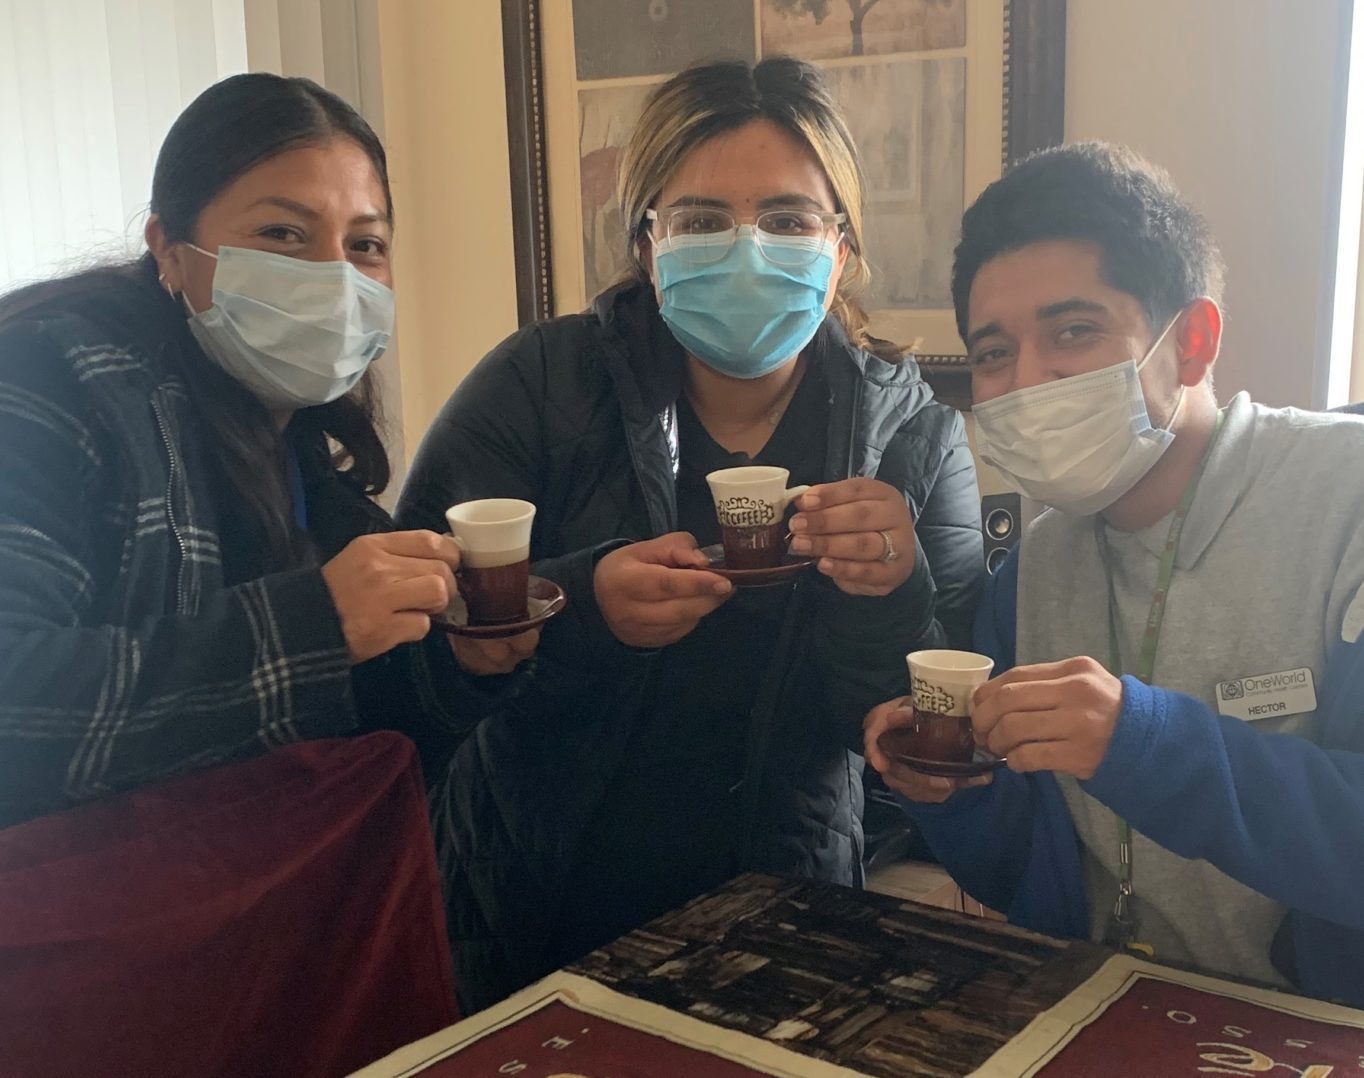 Veronica, Ximena and Hector having espresso with a patient during a home visit.